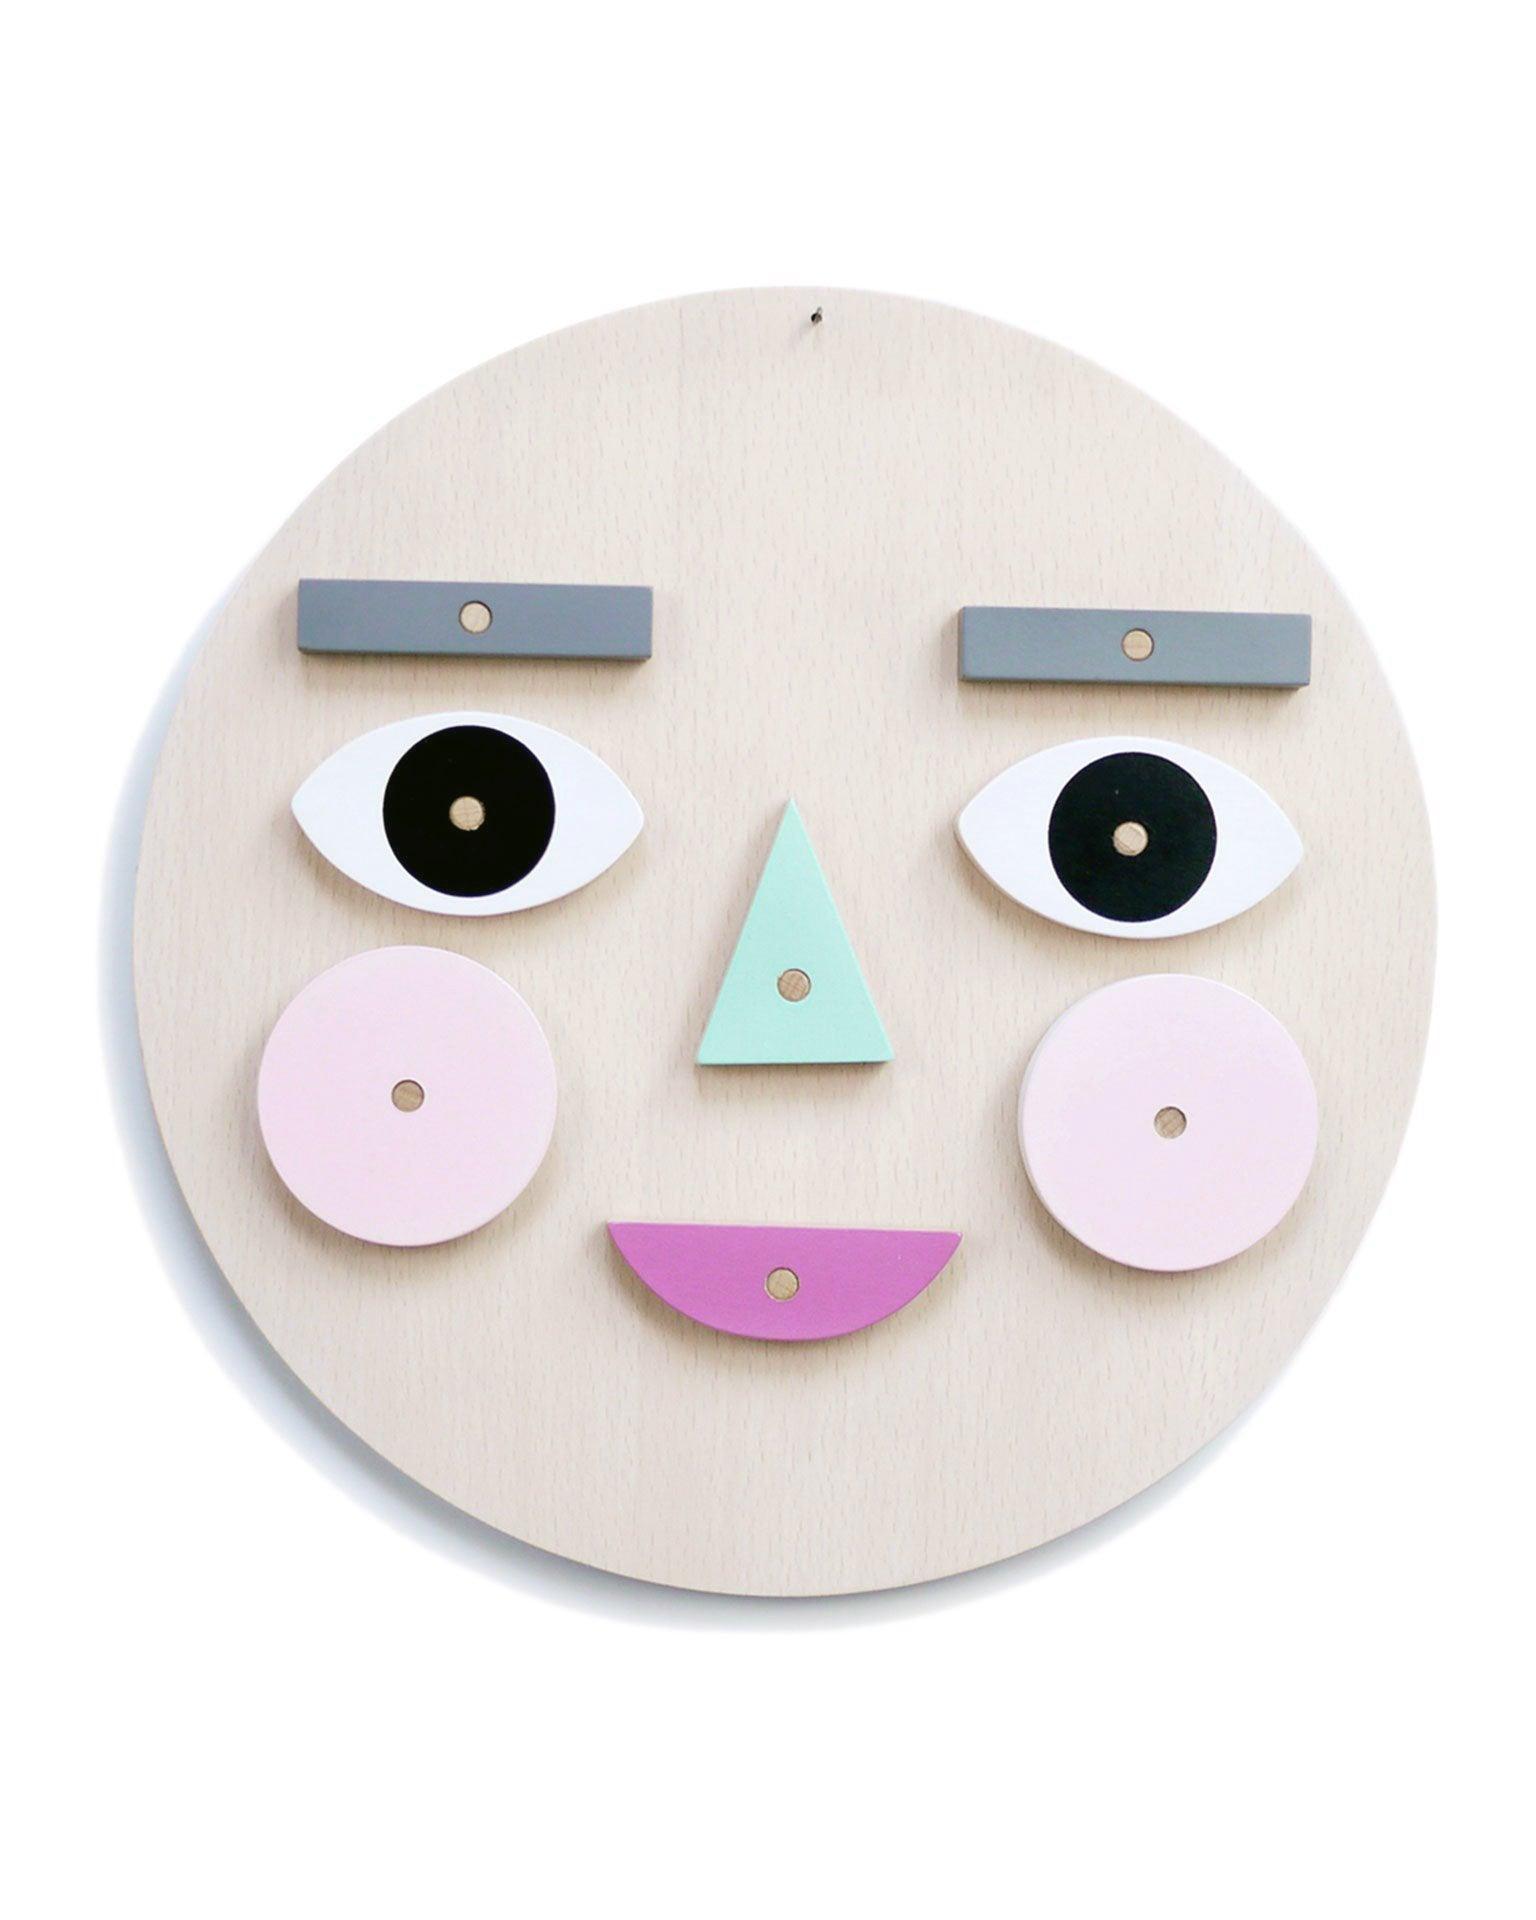 Make a Face Wooden Toy - Why and Whale